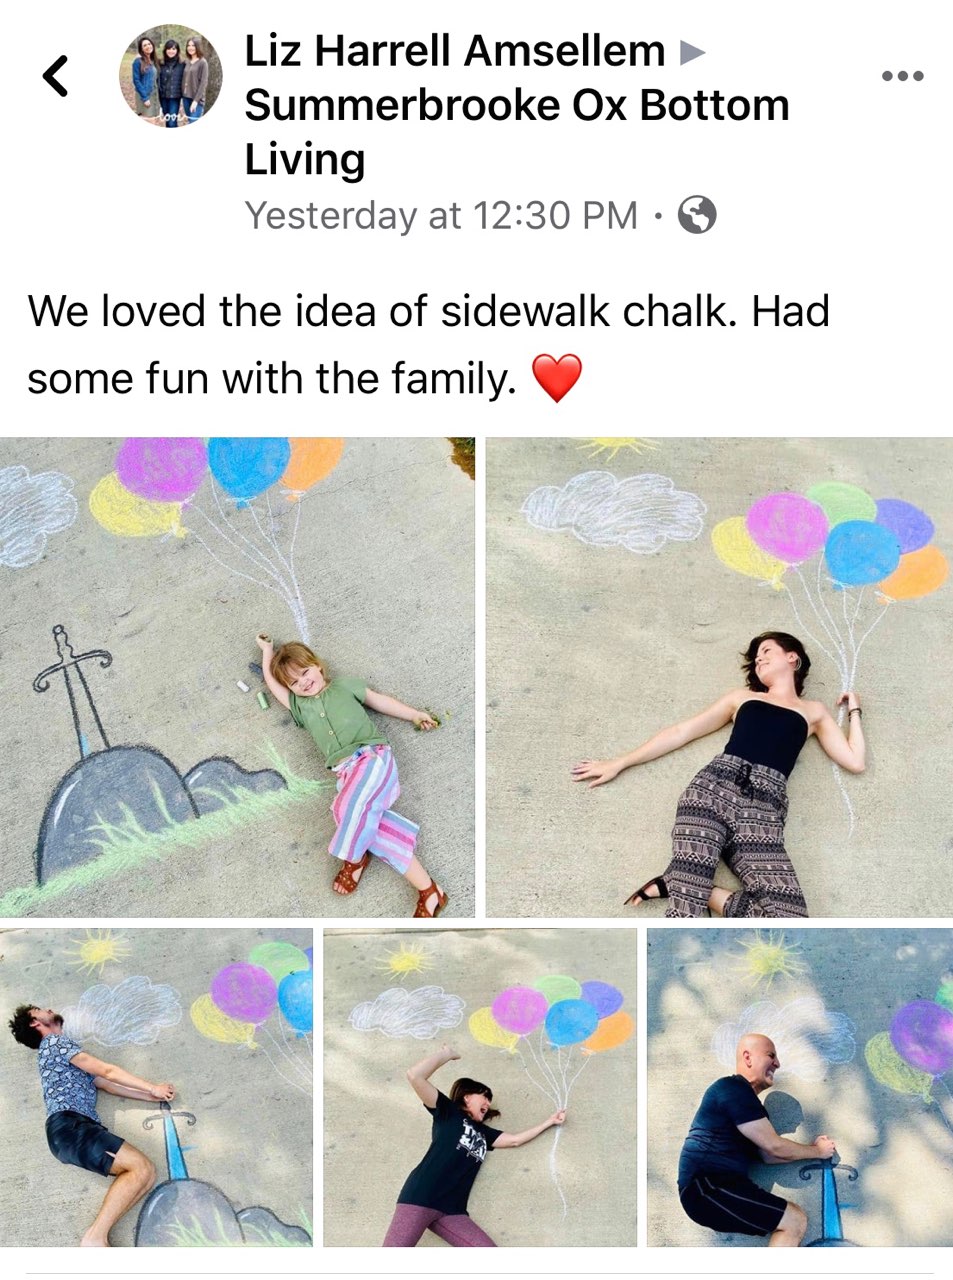 We loved the idea of sidewalk chalk. Had some fun with the family.